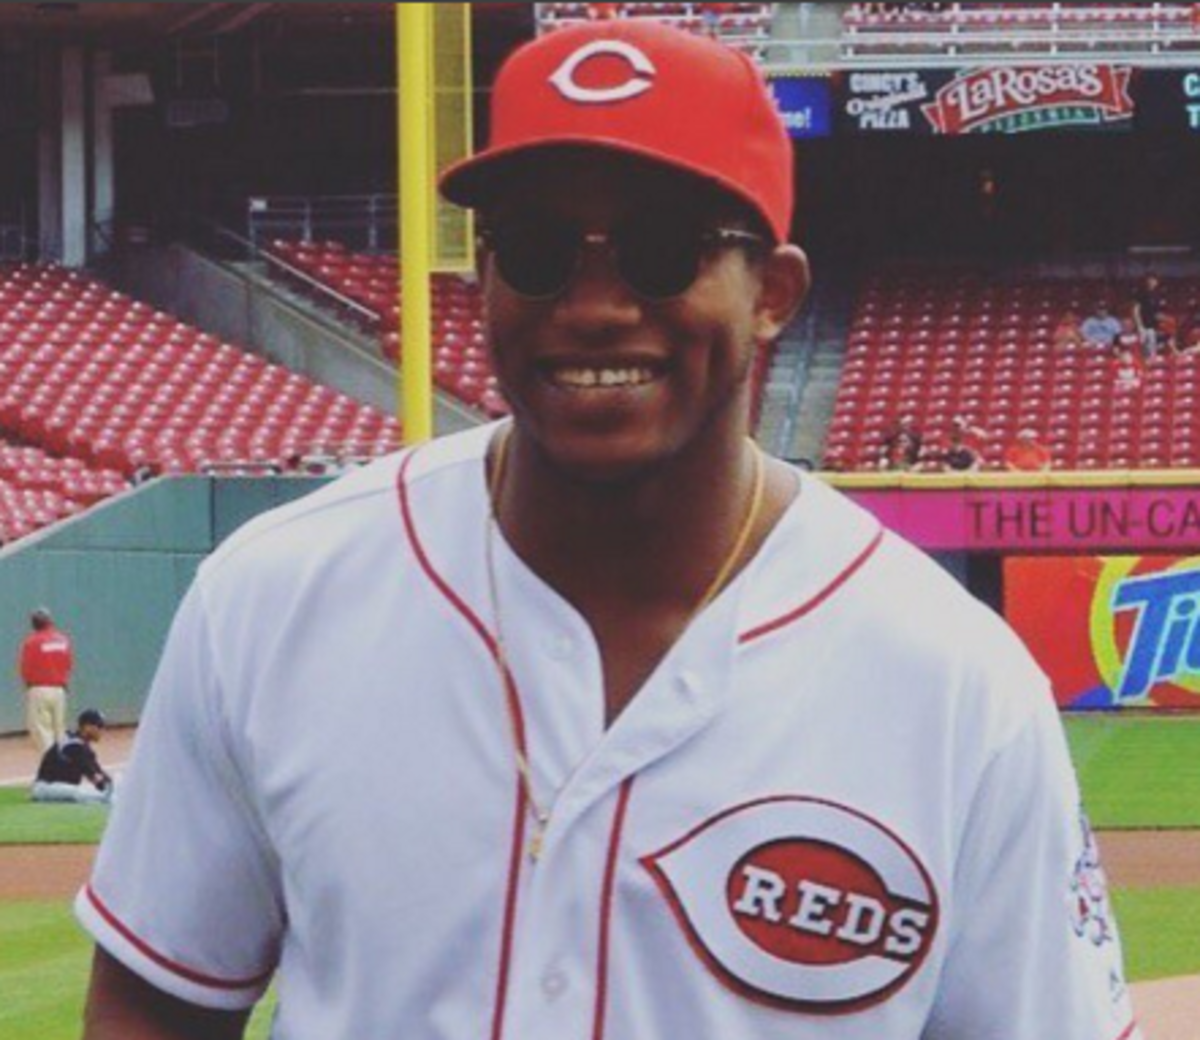 Darron Lee smiles in Cincinnati Reds hat and jersey before first pitch.